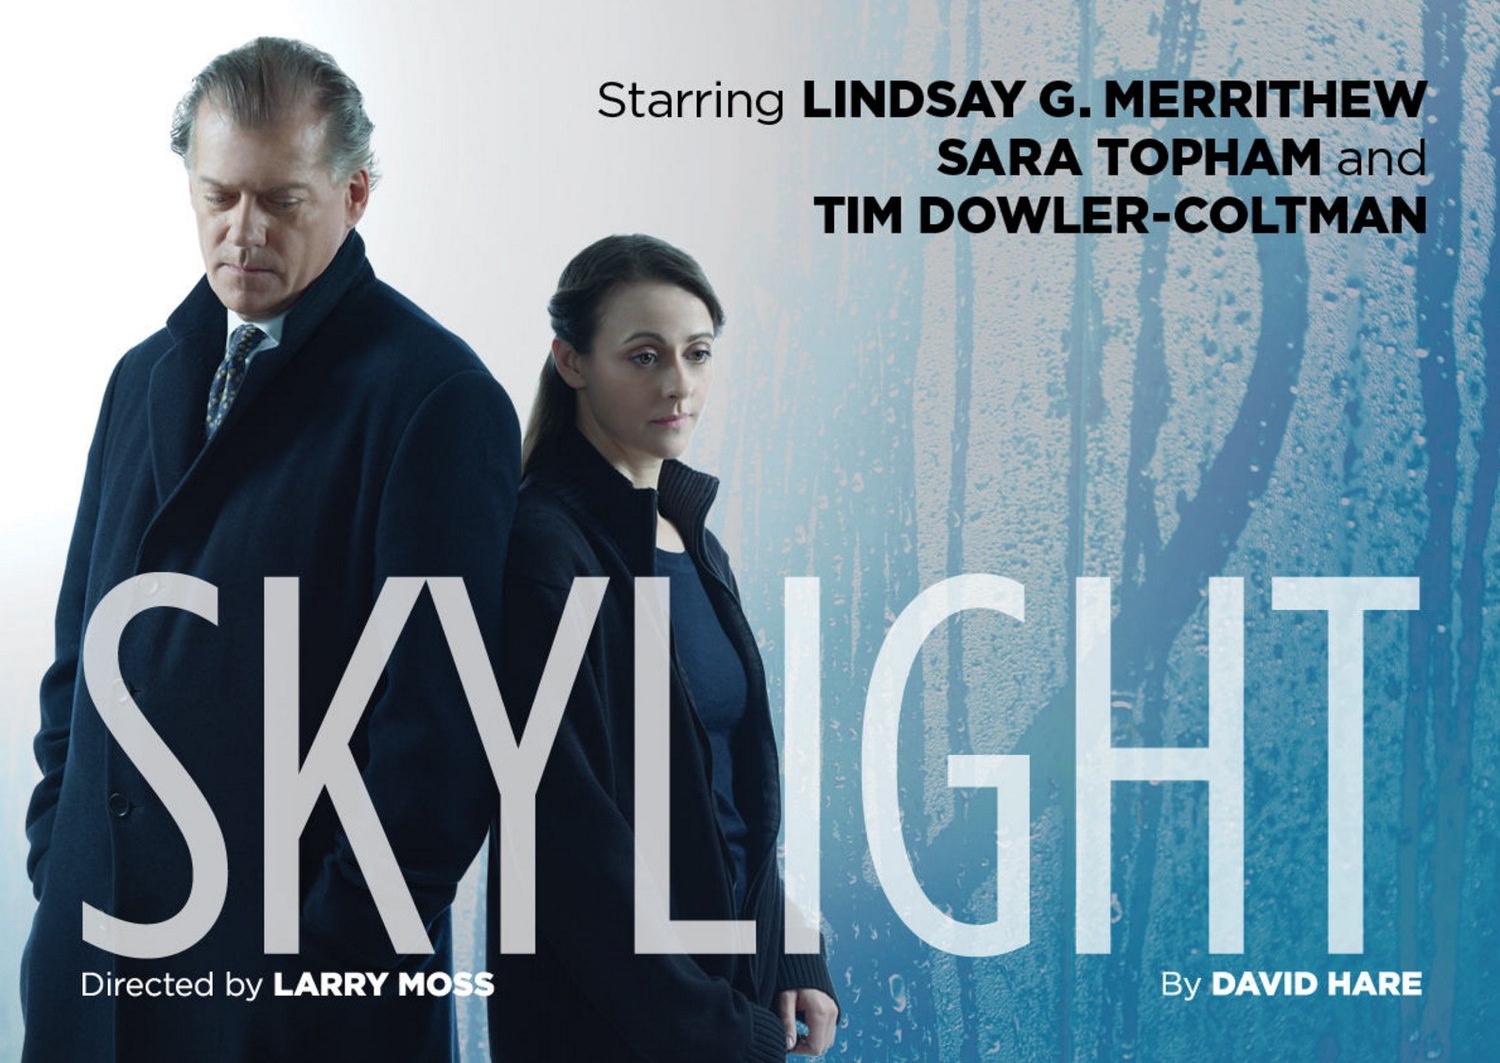 DAVID HARE’S CRITICALLY ACCLAIMED SKYLIGHT DEBUTS ON JUNE 15TH